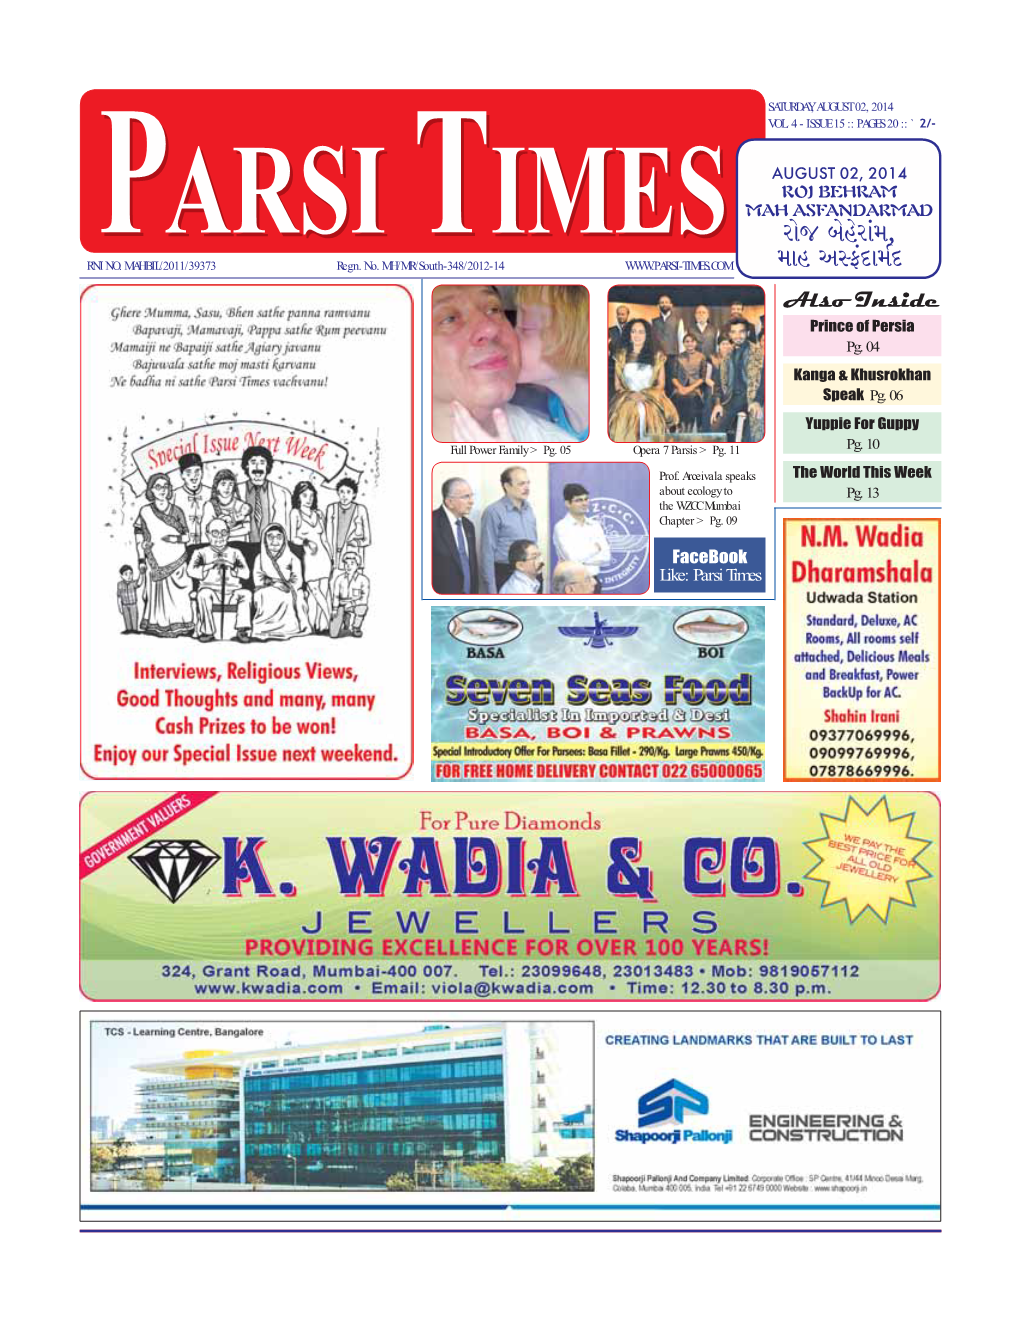 Facebook Like: Parsi Times SATURDAY, AUGUST 02, 2014 P.T